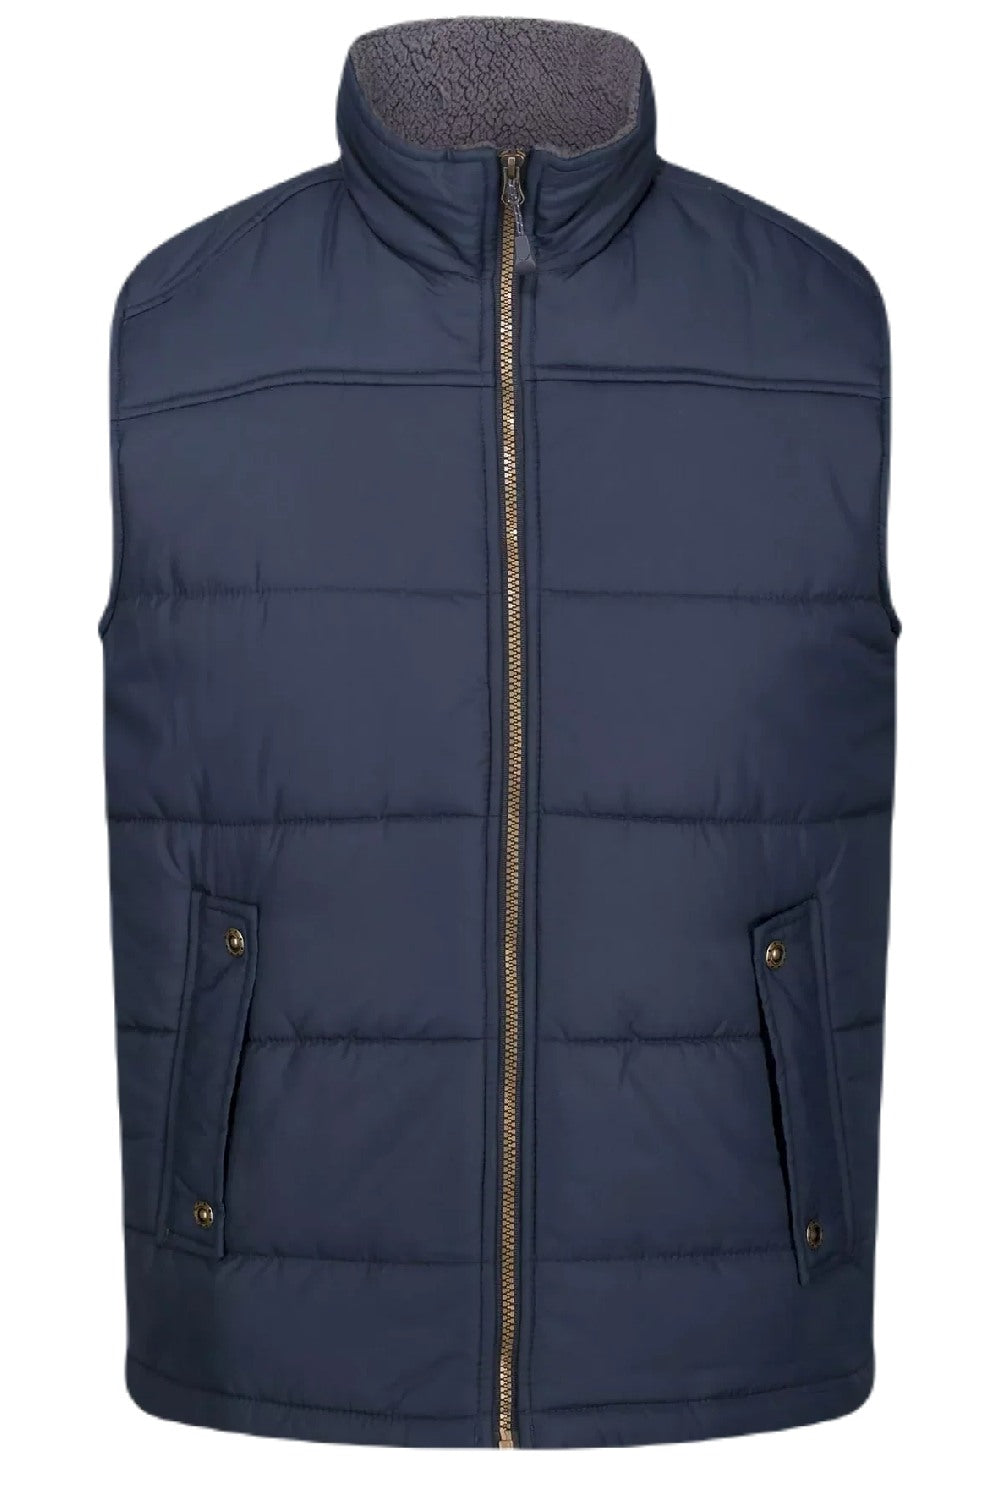 Regatta Professional Mens Altoona Insulated Quilted Gilet in Navy